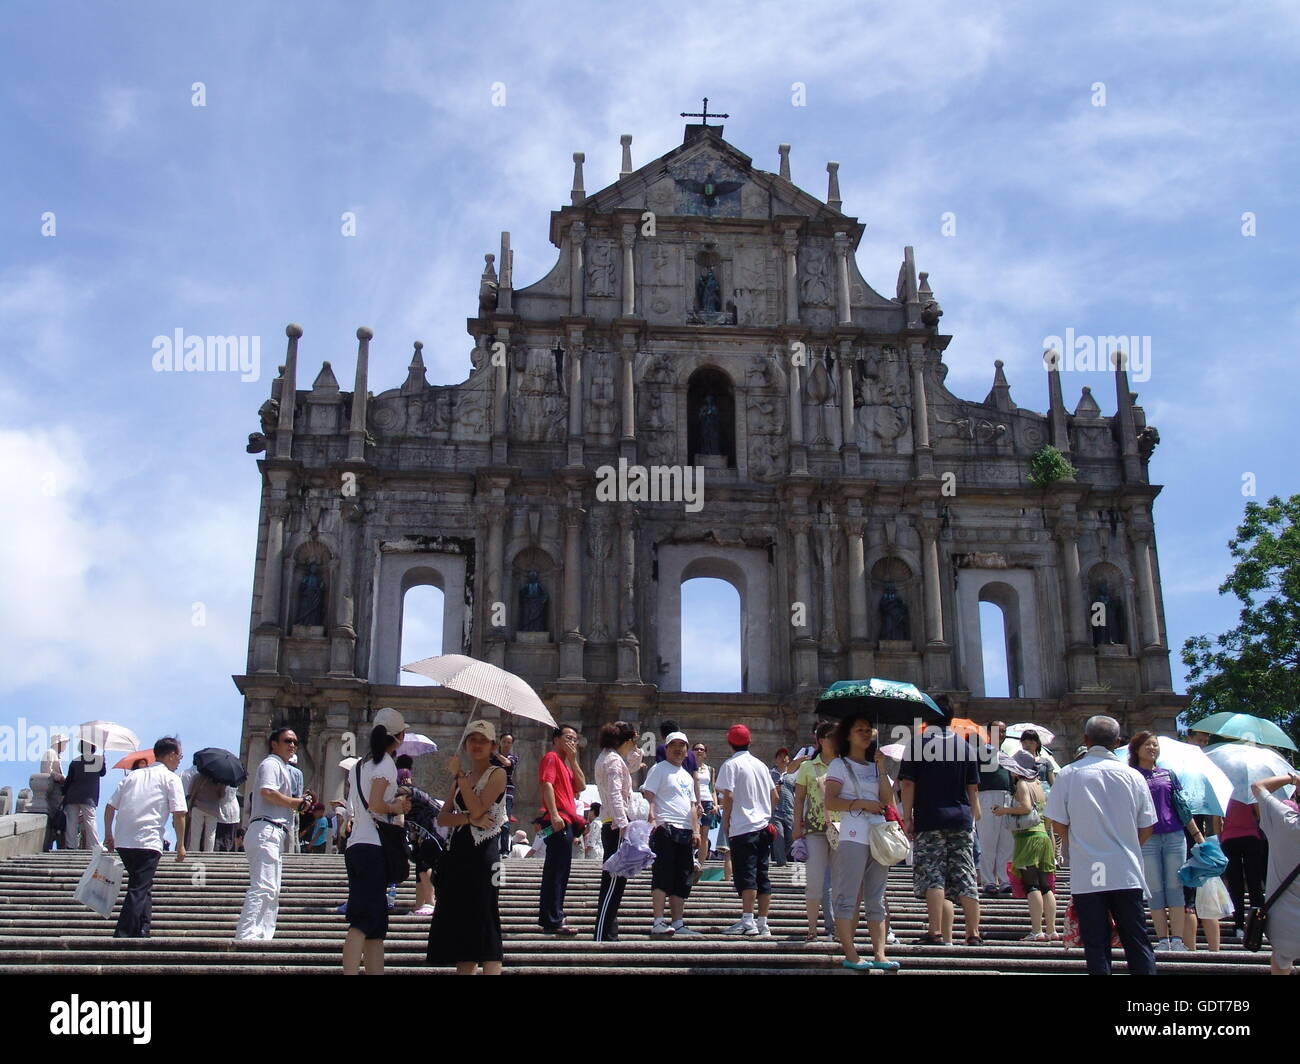 July 22, 2016 - Macau, Macau, China - Macau, China - July 22 2016: (EDITORIAL USE ONLY. CHINA OUT) The Ruins of St. Paul's (pinyin: DÂ¨Â¤sÂ¨Â¡nbÂ¨Â¡ PÂ¨Â¢ifÂ¨Â¡ng) are the ruins of a 16th-century complex in Macau including what was originally St. Paul's College and the Church of St. Paul also known as ''Mater Dei'', a 17th-century Portuguese church dedicated to Saint Paul the Apostle. Today, the ruins are one of Macau's best known landmarks. They are often, but incorrectly, mentioned as a former cathedral (see Macau Cathedral), a status they never had. In 2005, they were officially listed as p Stock Photo